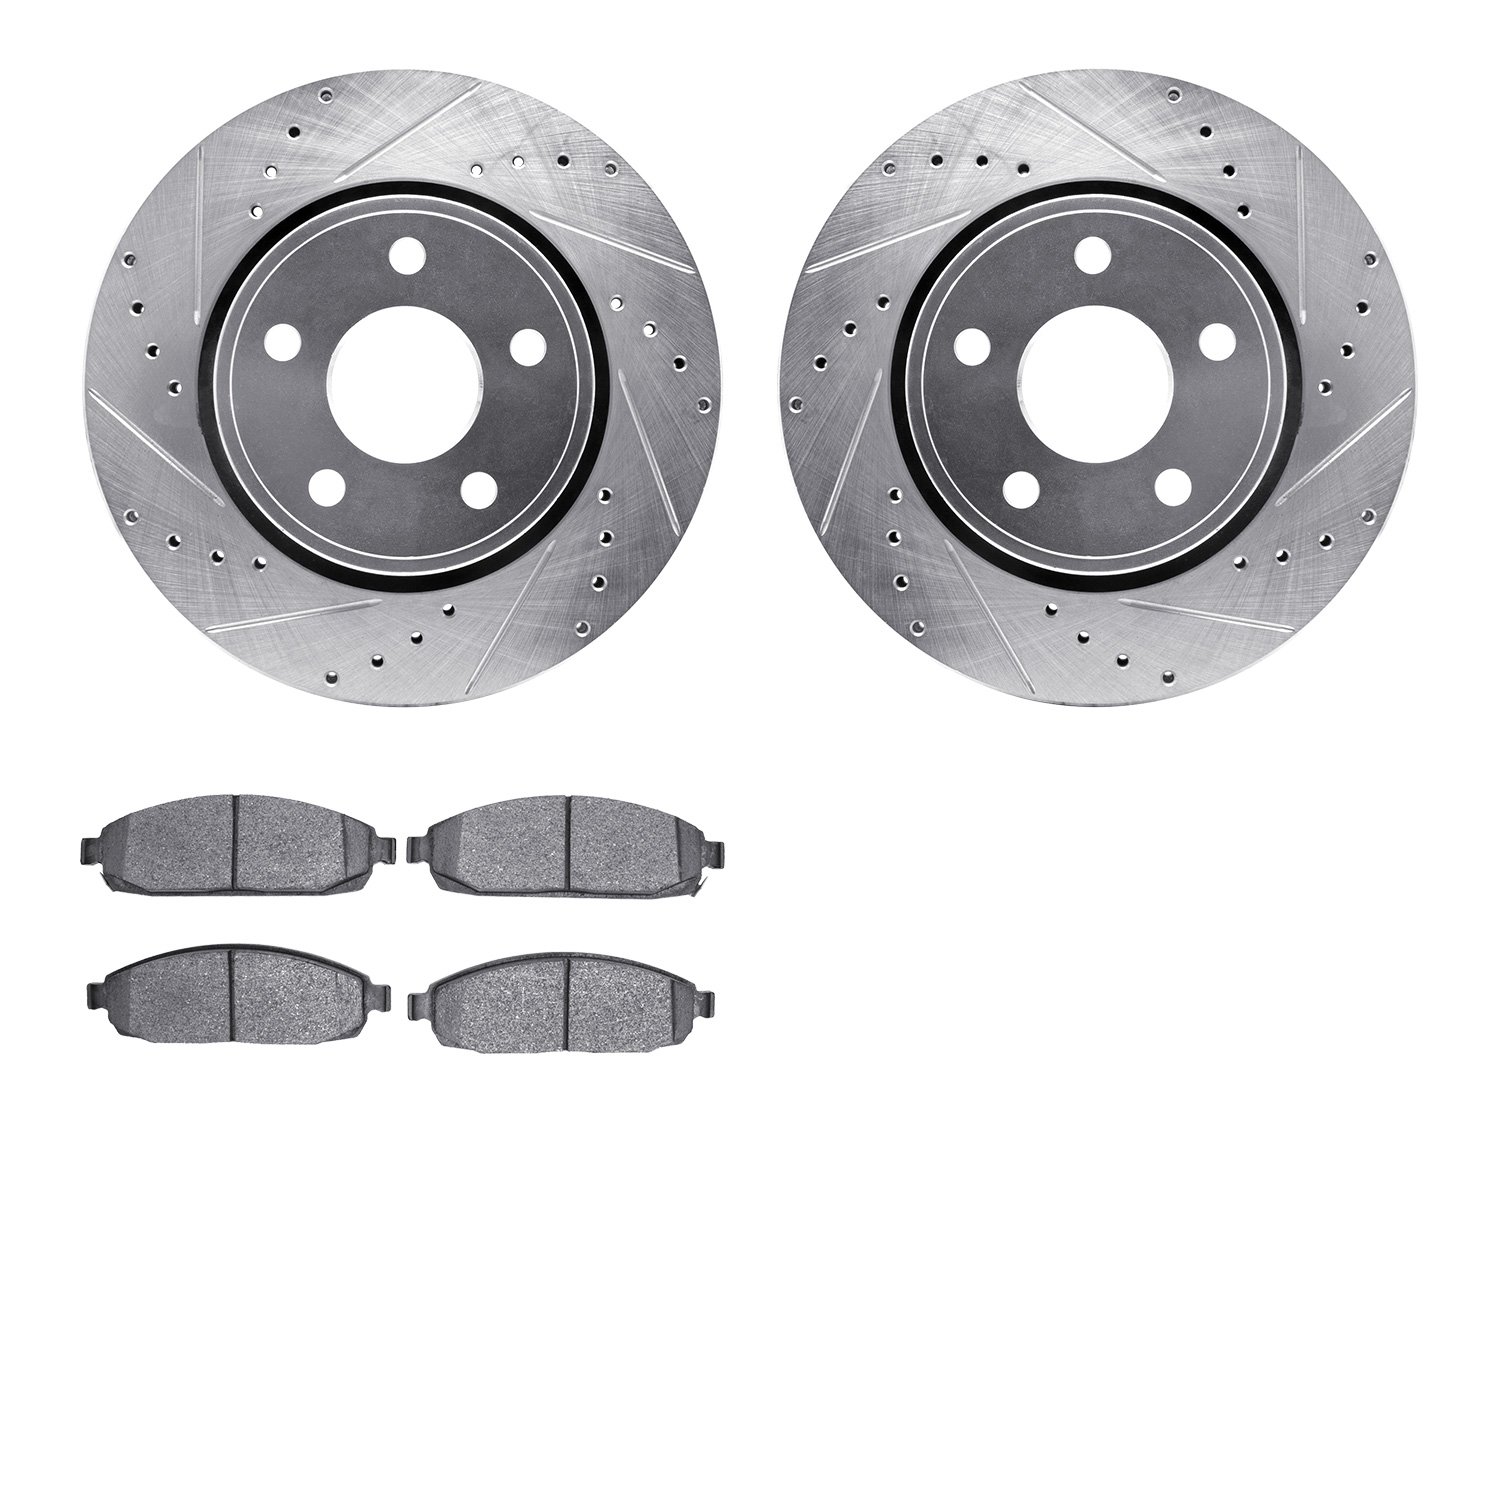 7402-42001 Drilled/Slotted Brake Rotors with Ultimate-Duty Brake Pads Kit [Silver], 2005-2010 Mopar, Position: Front